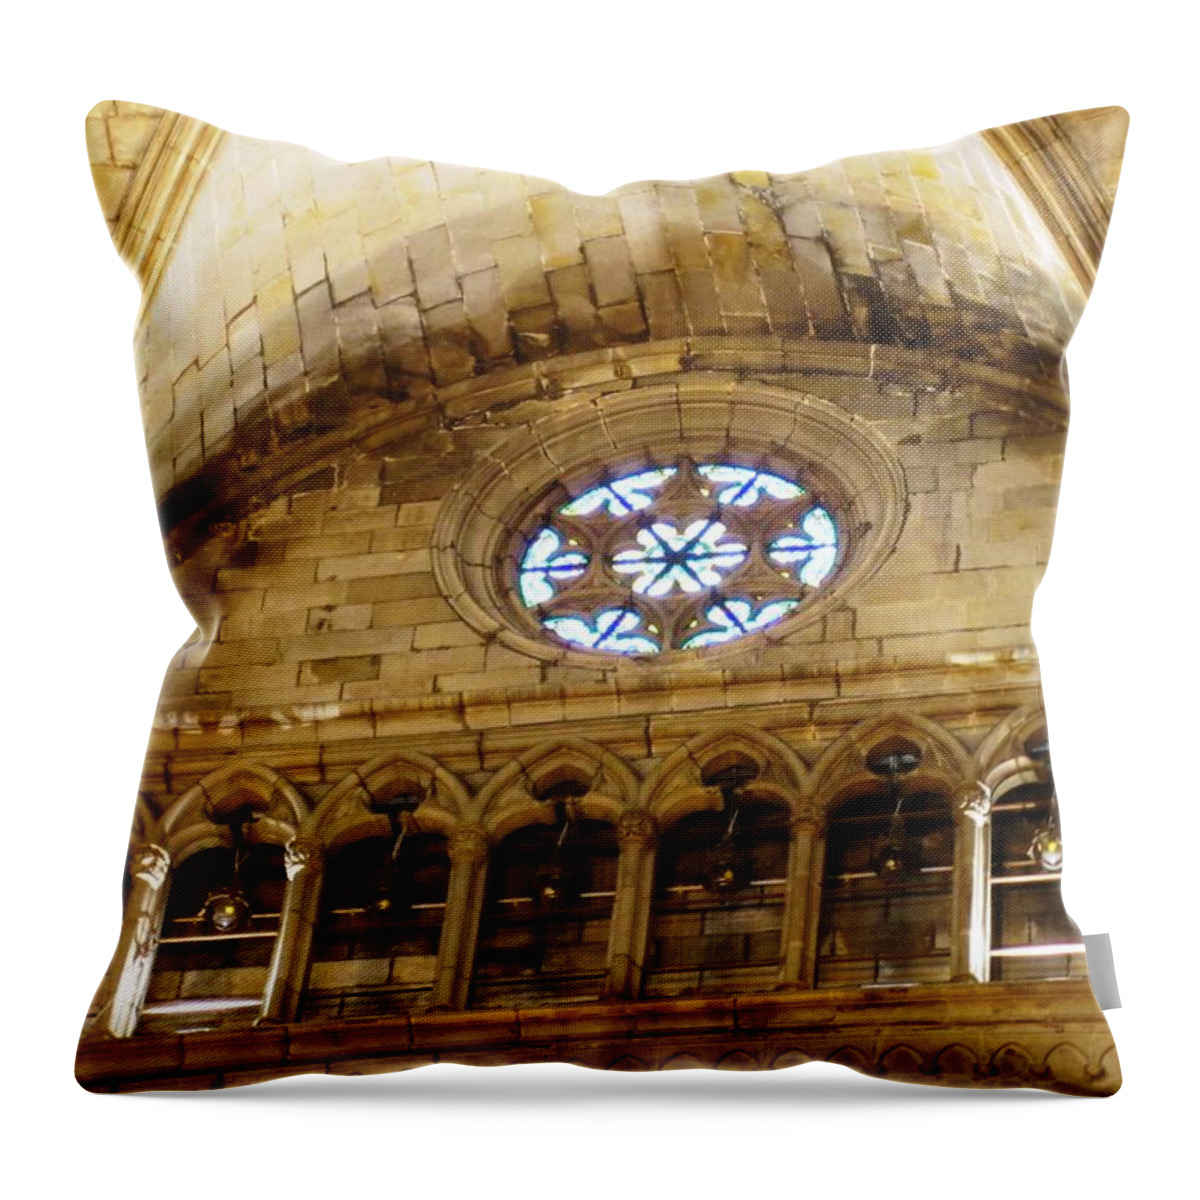 Barcelona Throw Pillow featuring the photograph Fascinating Historic Cathedral Building Architecture and Interior Window Design in Barcelona Spain by John Shiron